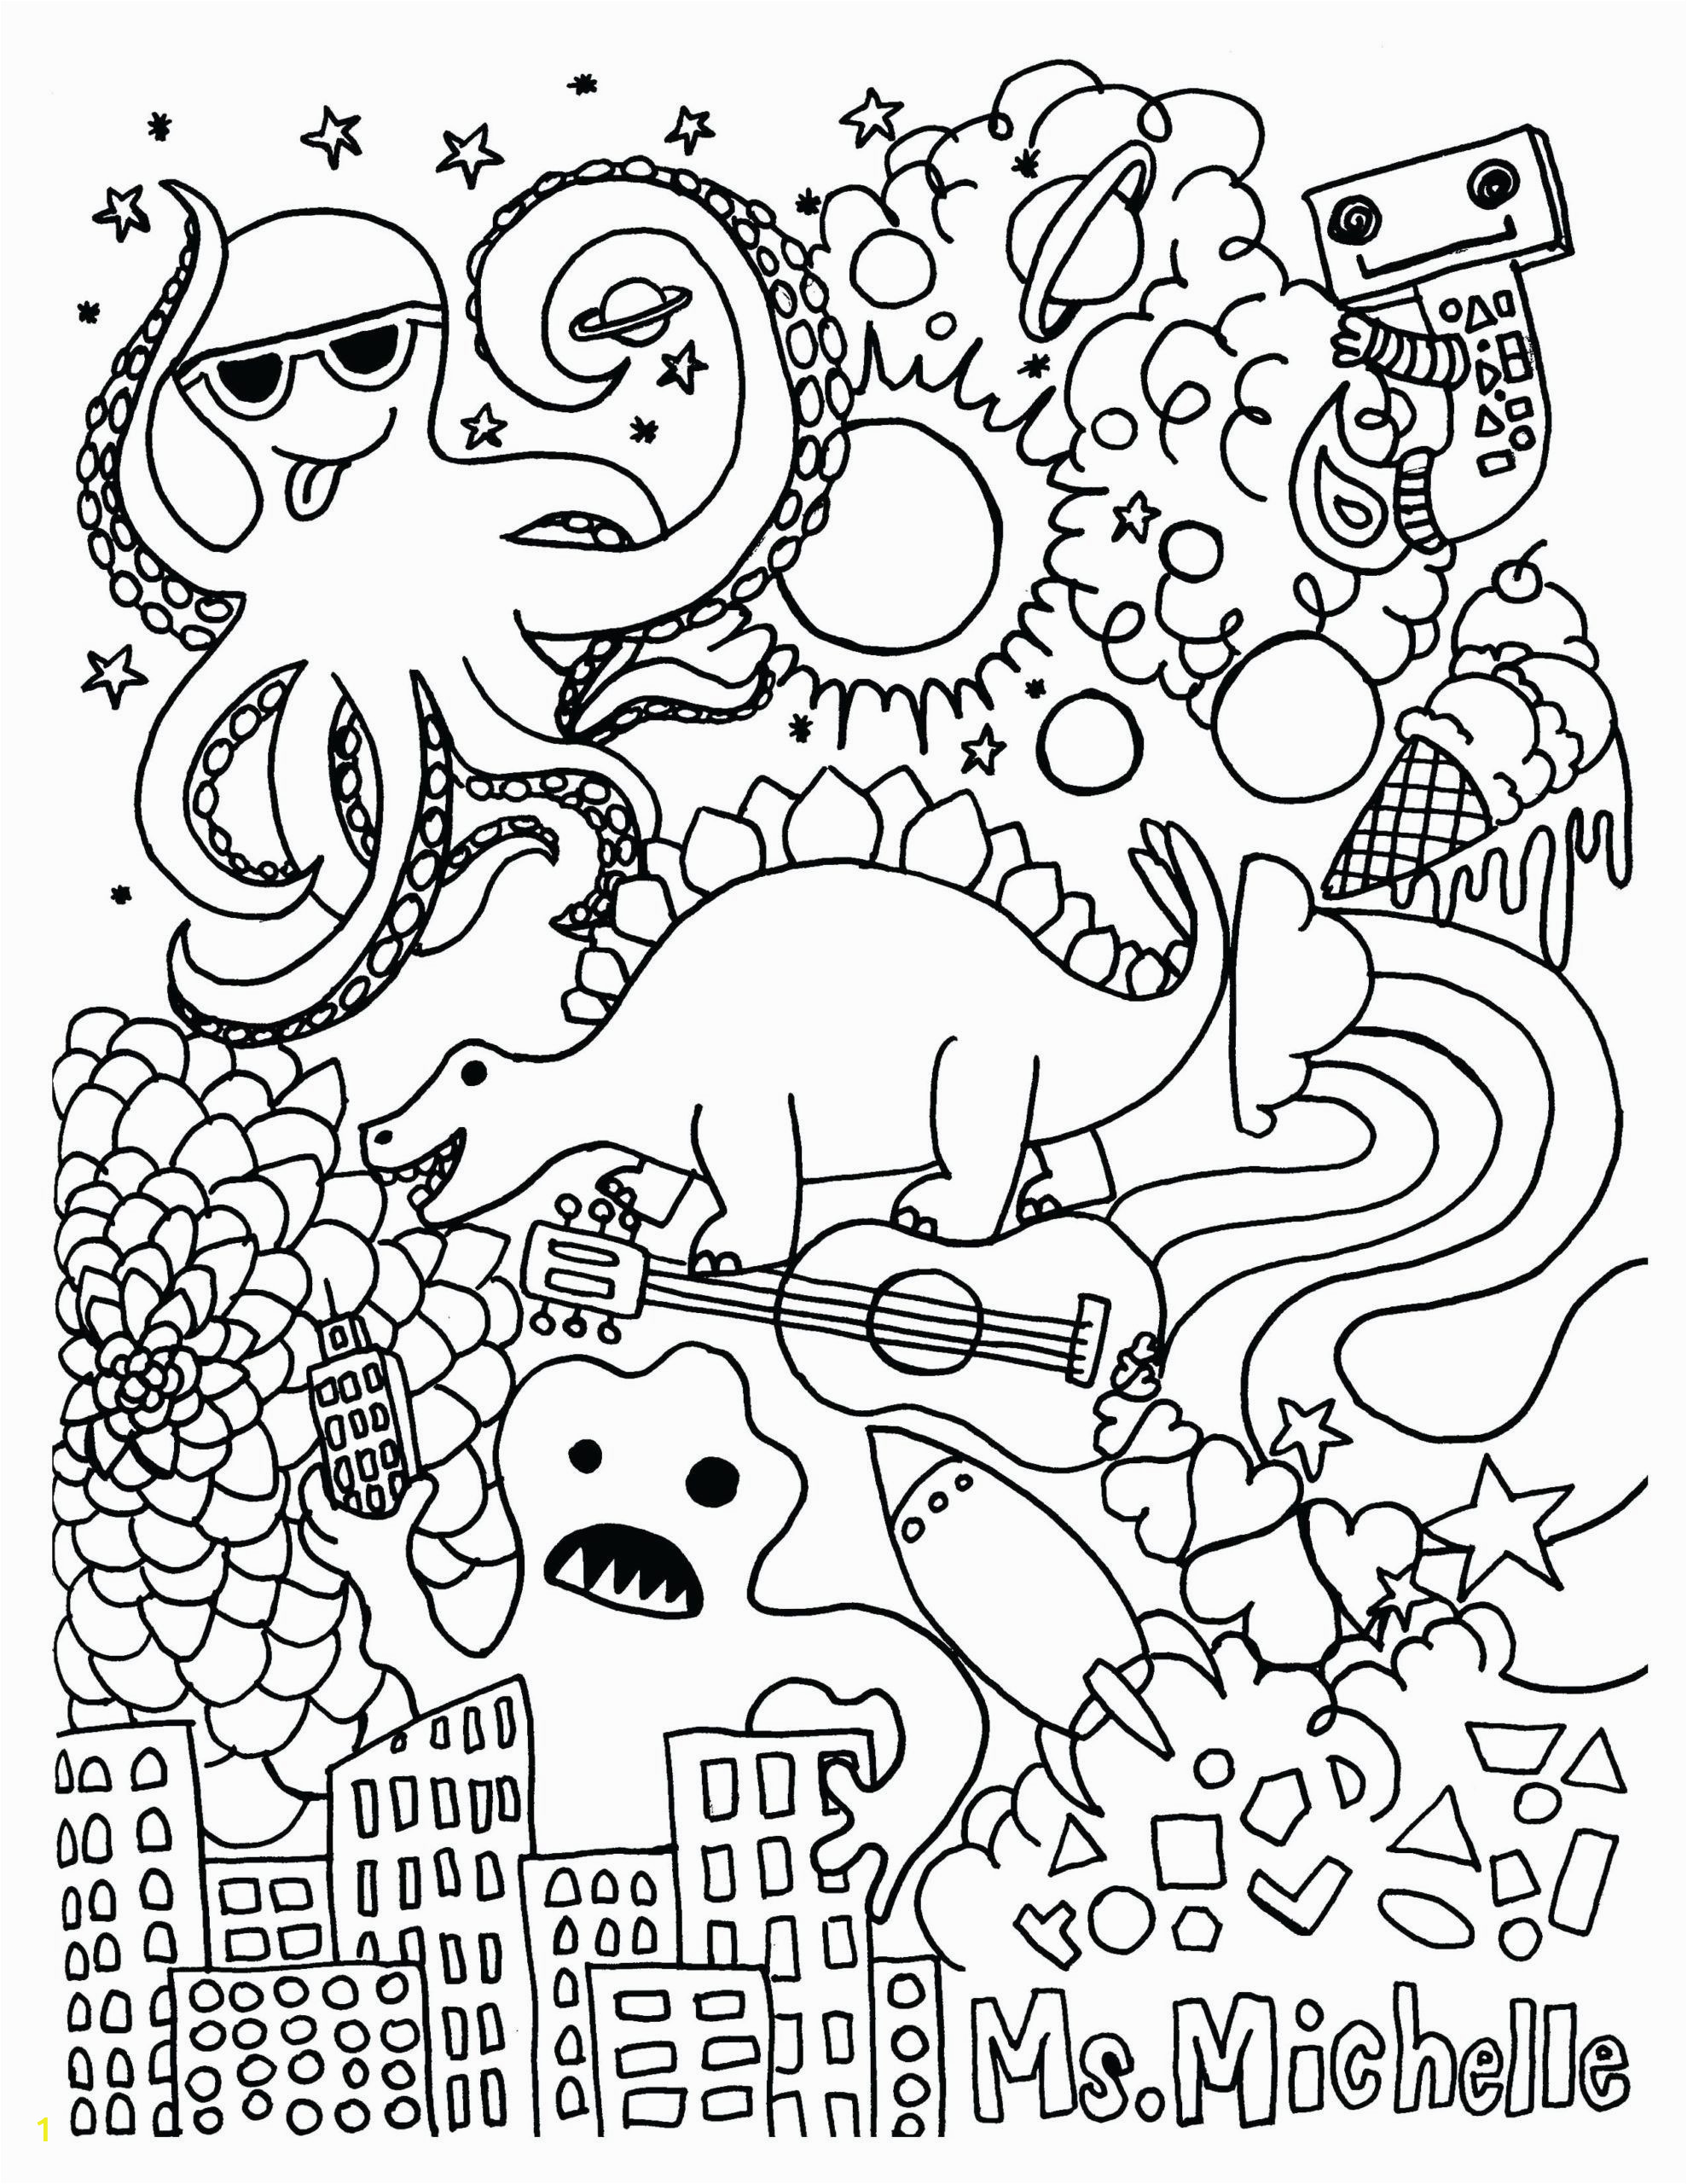 Free Color by Number Halloween Coloring Pages 6 Halloween Drawing Activity Worksheet Printable In 2020